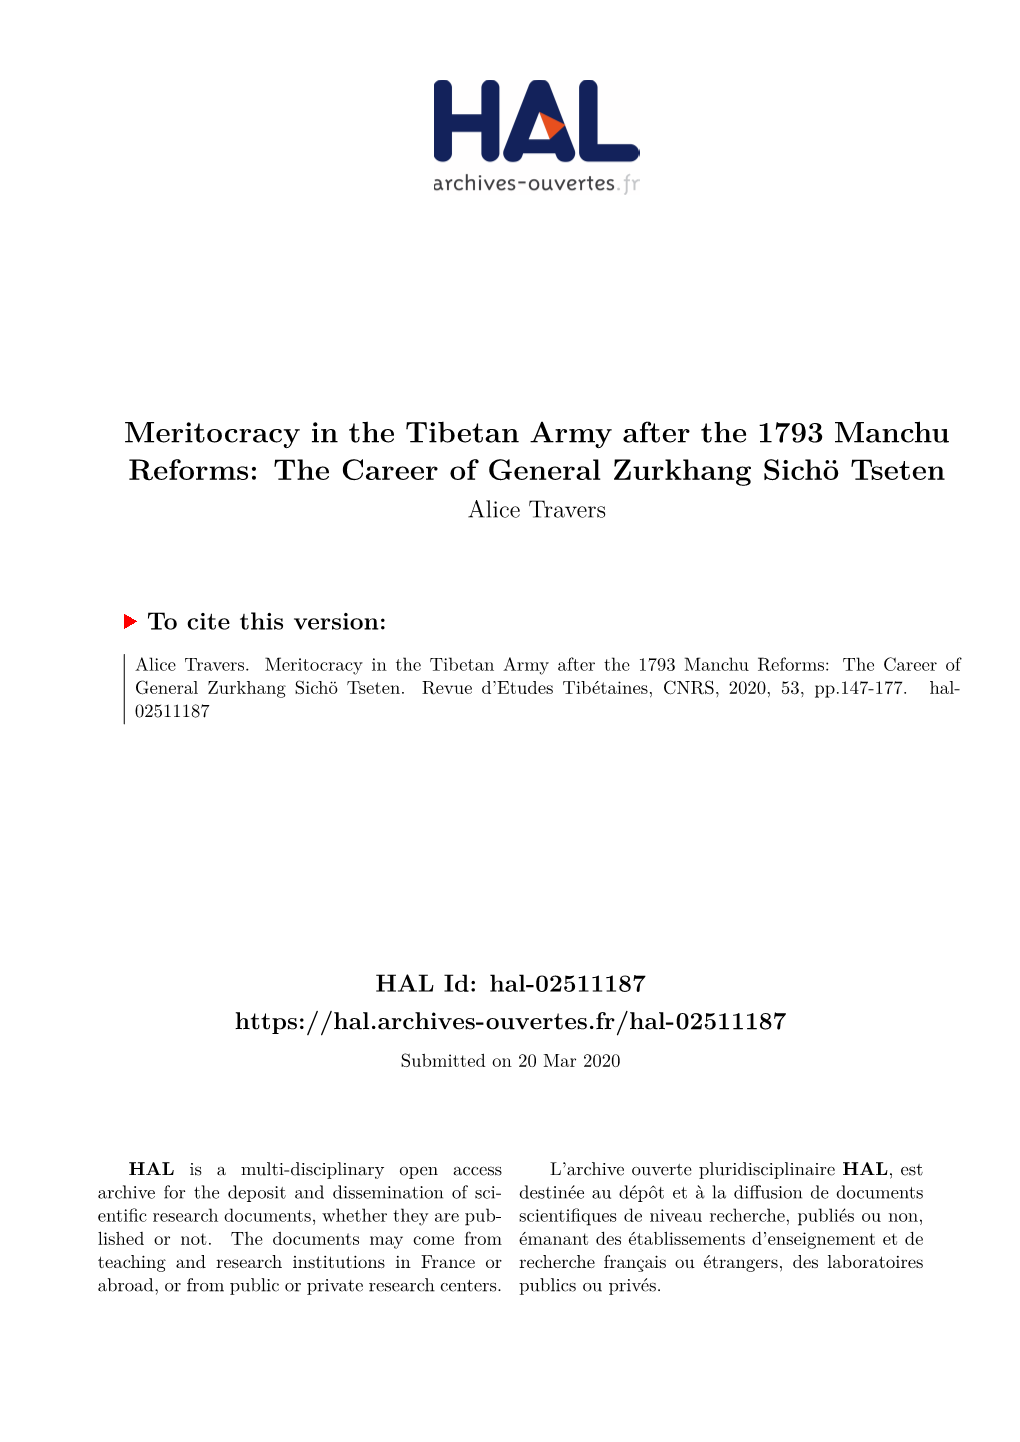 Meritocracy in the Tibetan Army After the 1793 Manchu Reforms: the Career of General Zurkhang Sichö Tseten Alice Travers